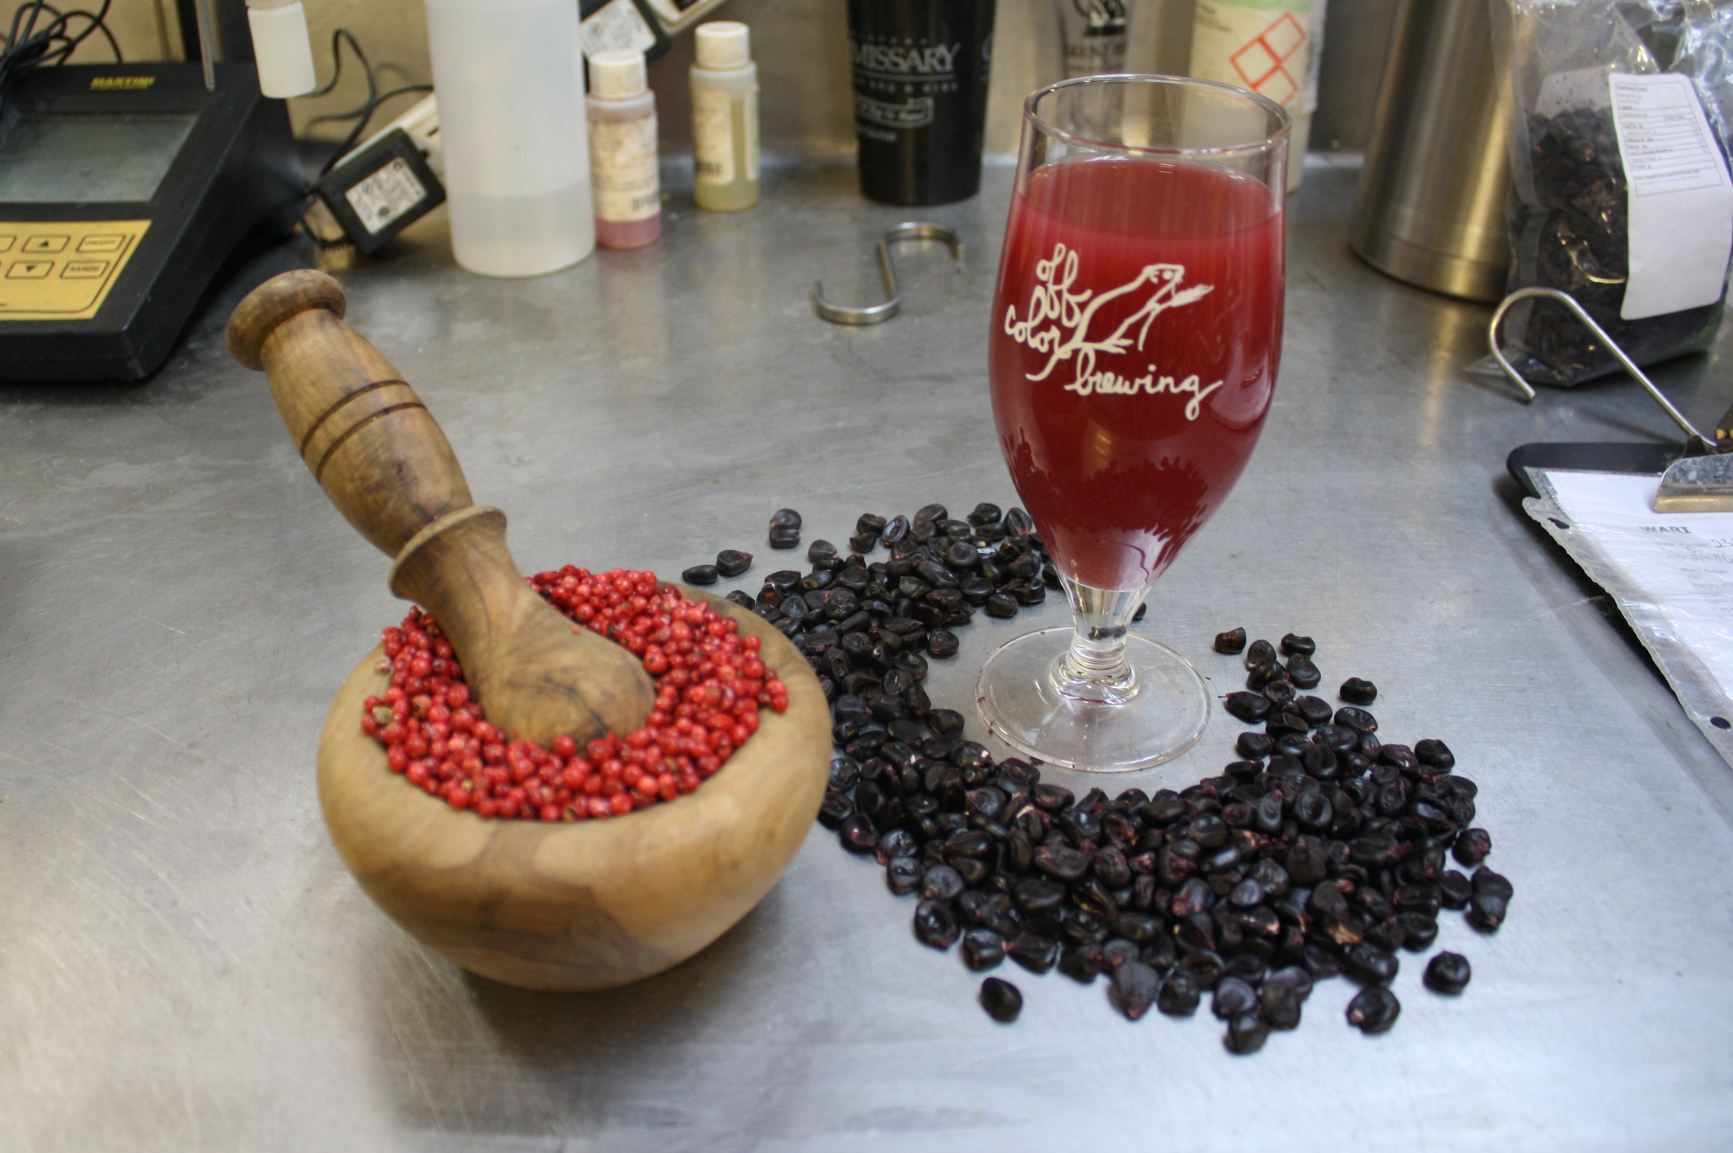 The Field Museum partnered with Off Color Brewing to produce Wari, a beer named for its ancient creators. Wari, shown here surrounded by purple corn and pink peppercorns has a 4.0% ABV and IBU of about 3.